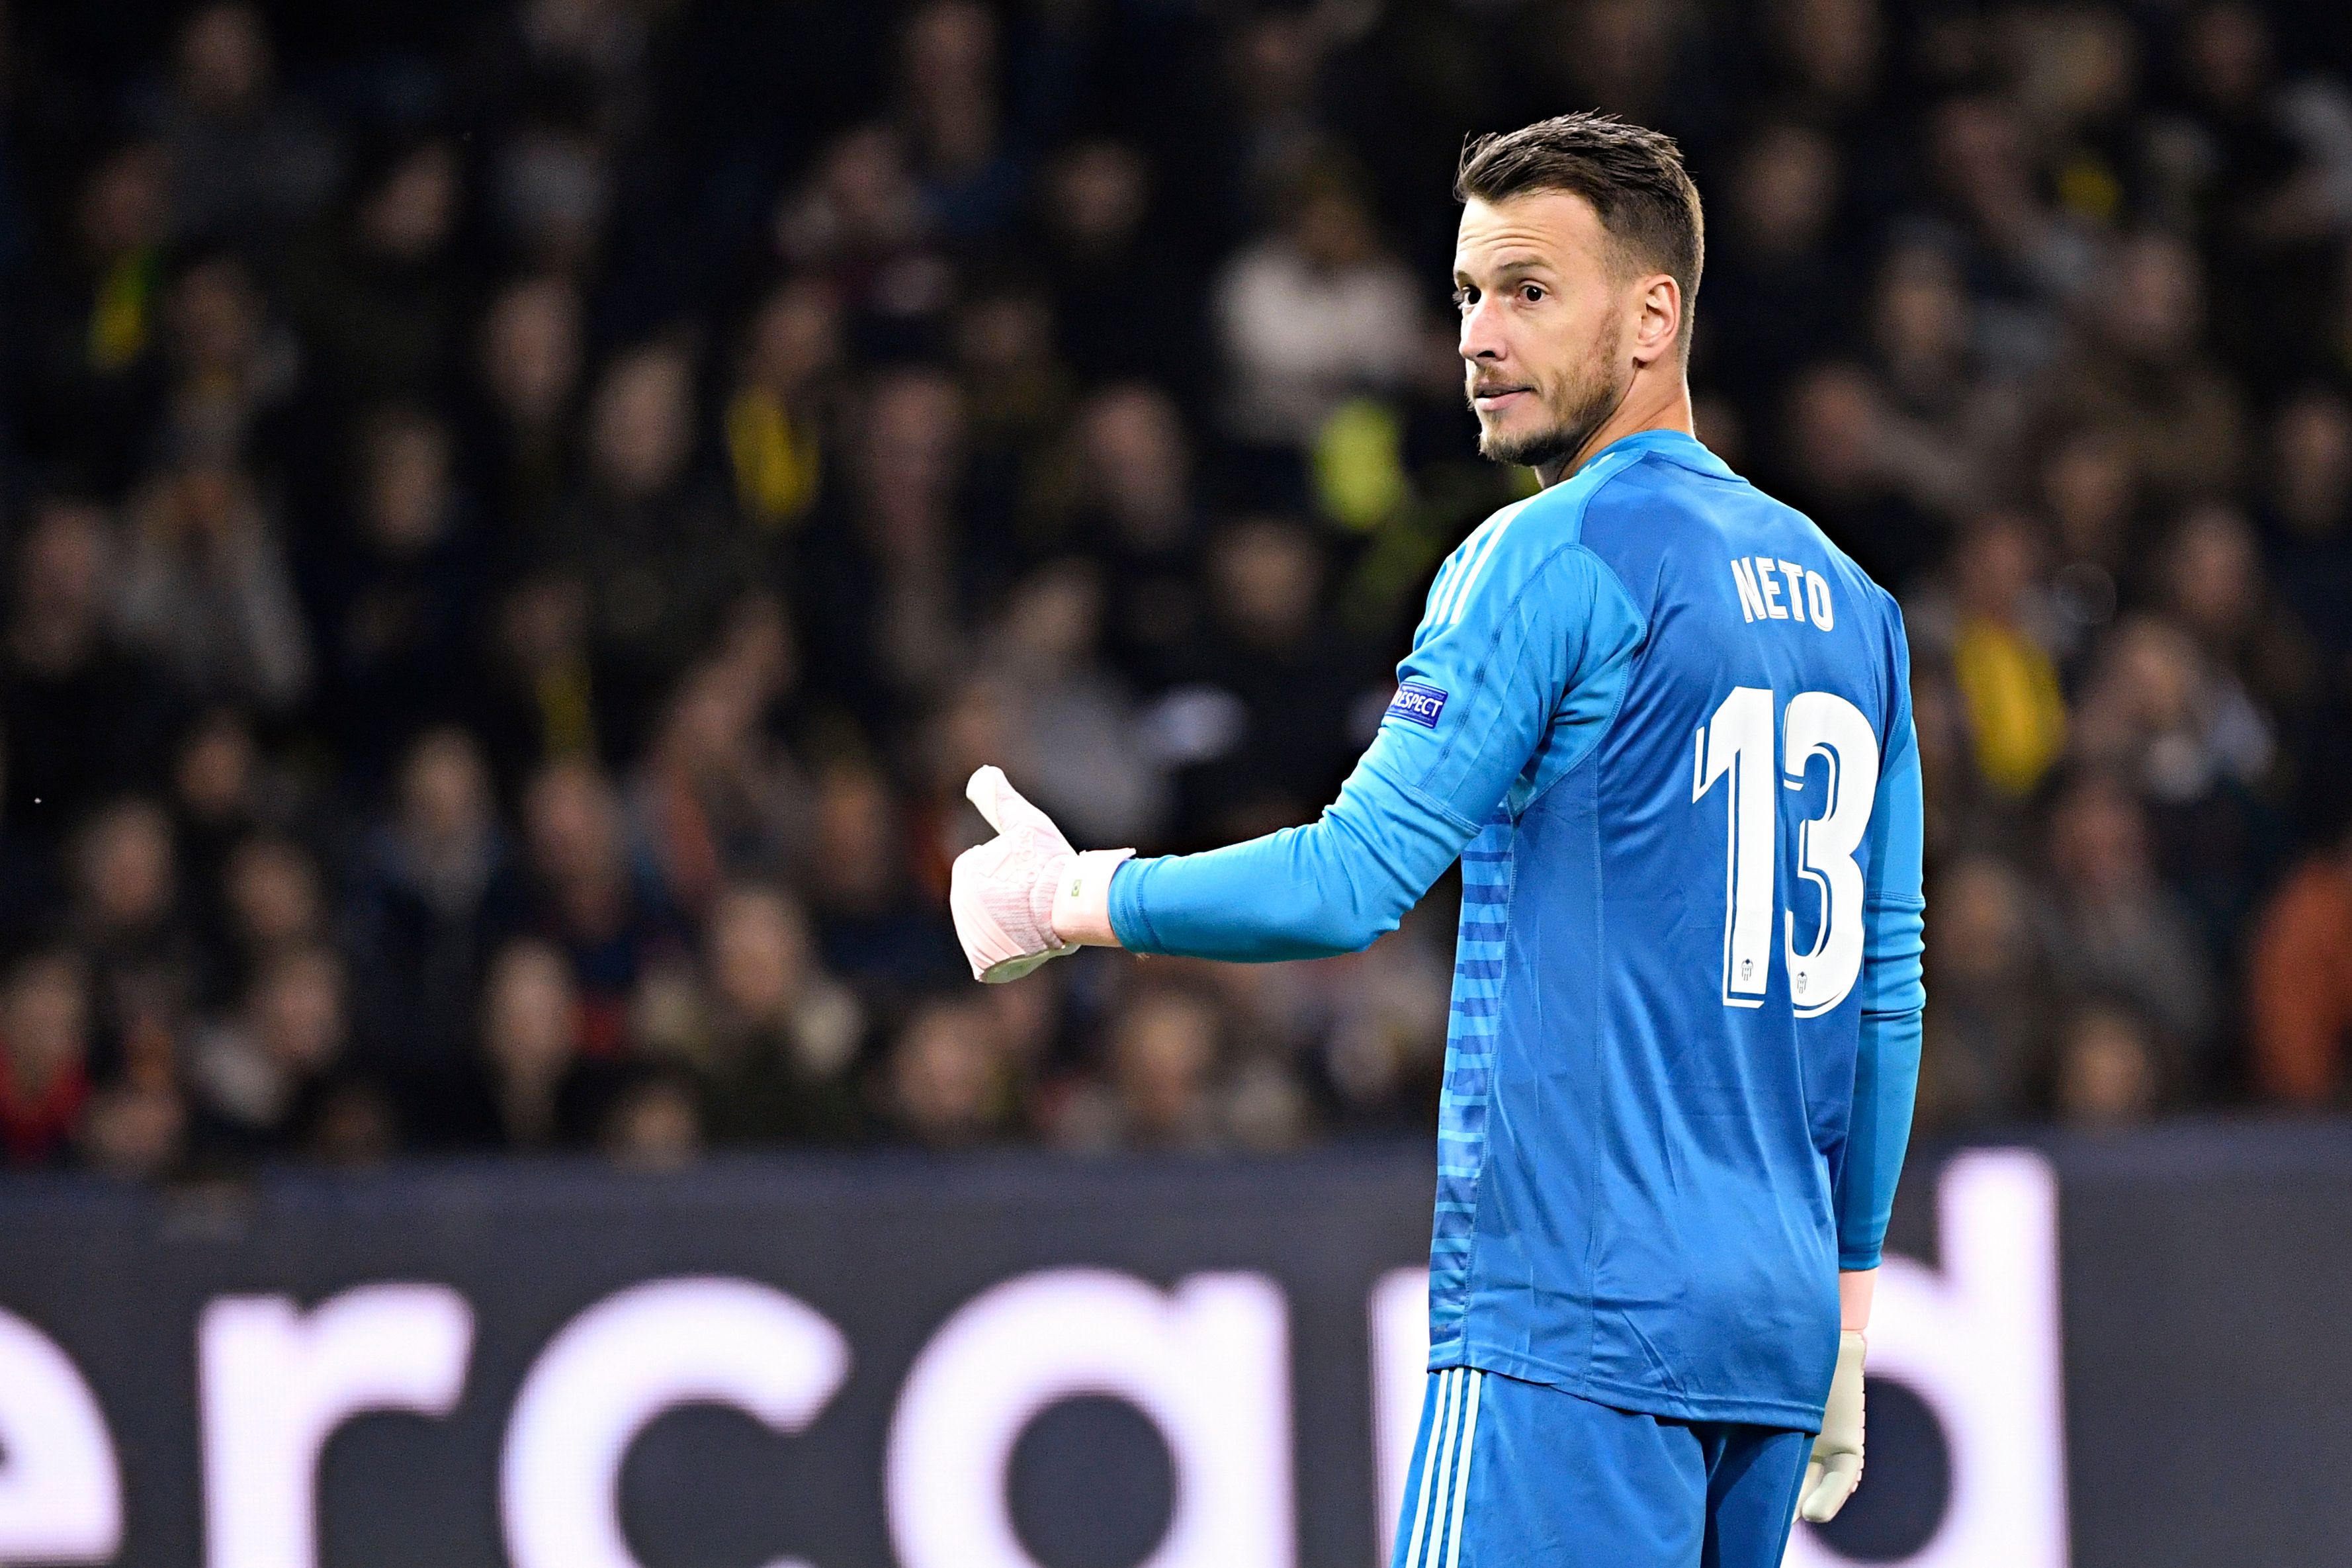 Neto headed to the Premier League? (Photo by Alain Grosclaude/AFP/Getty Images)